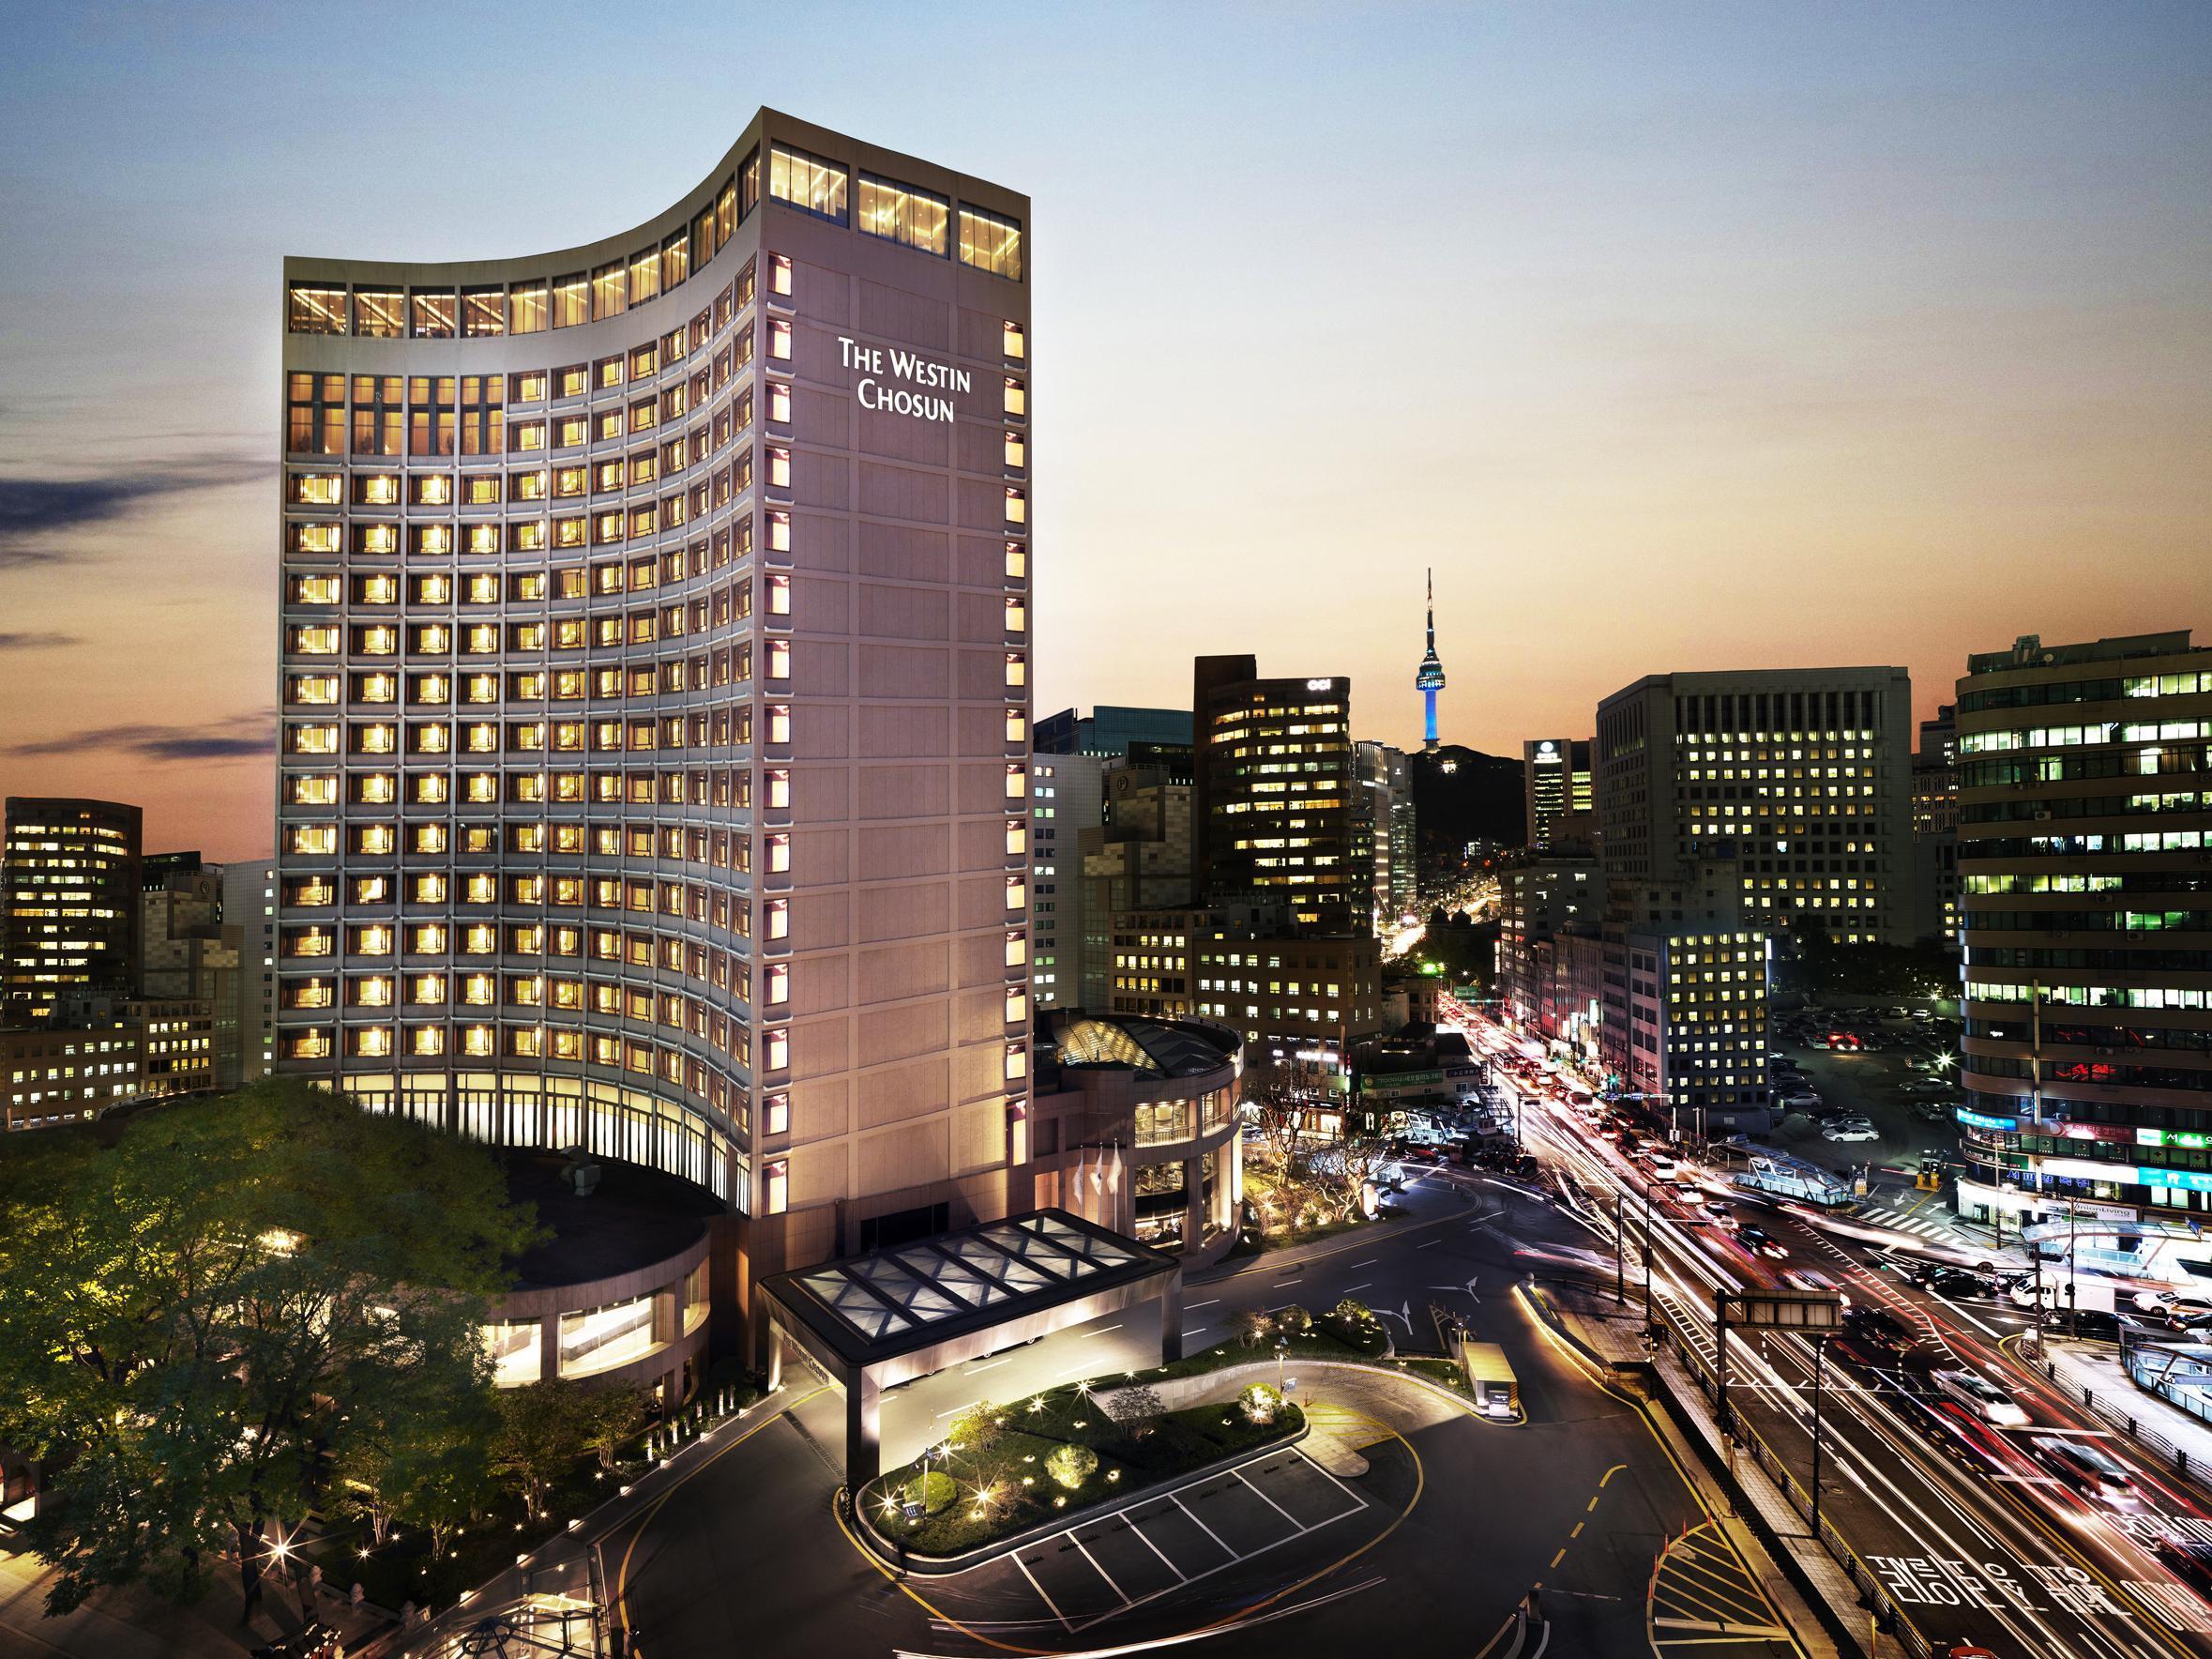 The Westin Chosun Seoul Korea FAQ 2017, What facilities are there in The Westin Chosun Seoul Korea 2017, What Languages Spoken are Supported in The Westin Chosun Seoul Korea 2017, Which payment cards are accepted in The Westin Chosun Seoul Korea , Korea The Westin Chosun Seoul room facilities and services Q&A 2017, Korea The Westin Chosun Seoul online booking services 2017, Korea The Westin Chosun Seoul address 2017, Korea The Westin Chosun Seoul telephone number 2017,Korea The Westin Chosun Seoul map 2017, Korea The Westin Chosun Seoul traffic guide 2017, how to go Korea The Westin Chosun Seoul, Korea The Westin Chosun Seoul booking online 2017, Korea The Westin Chosun Seoul room types 2017.